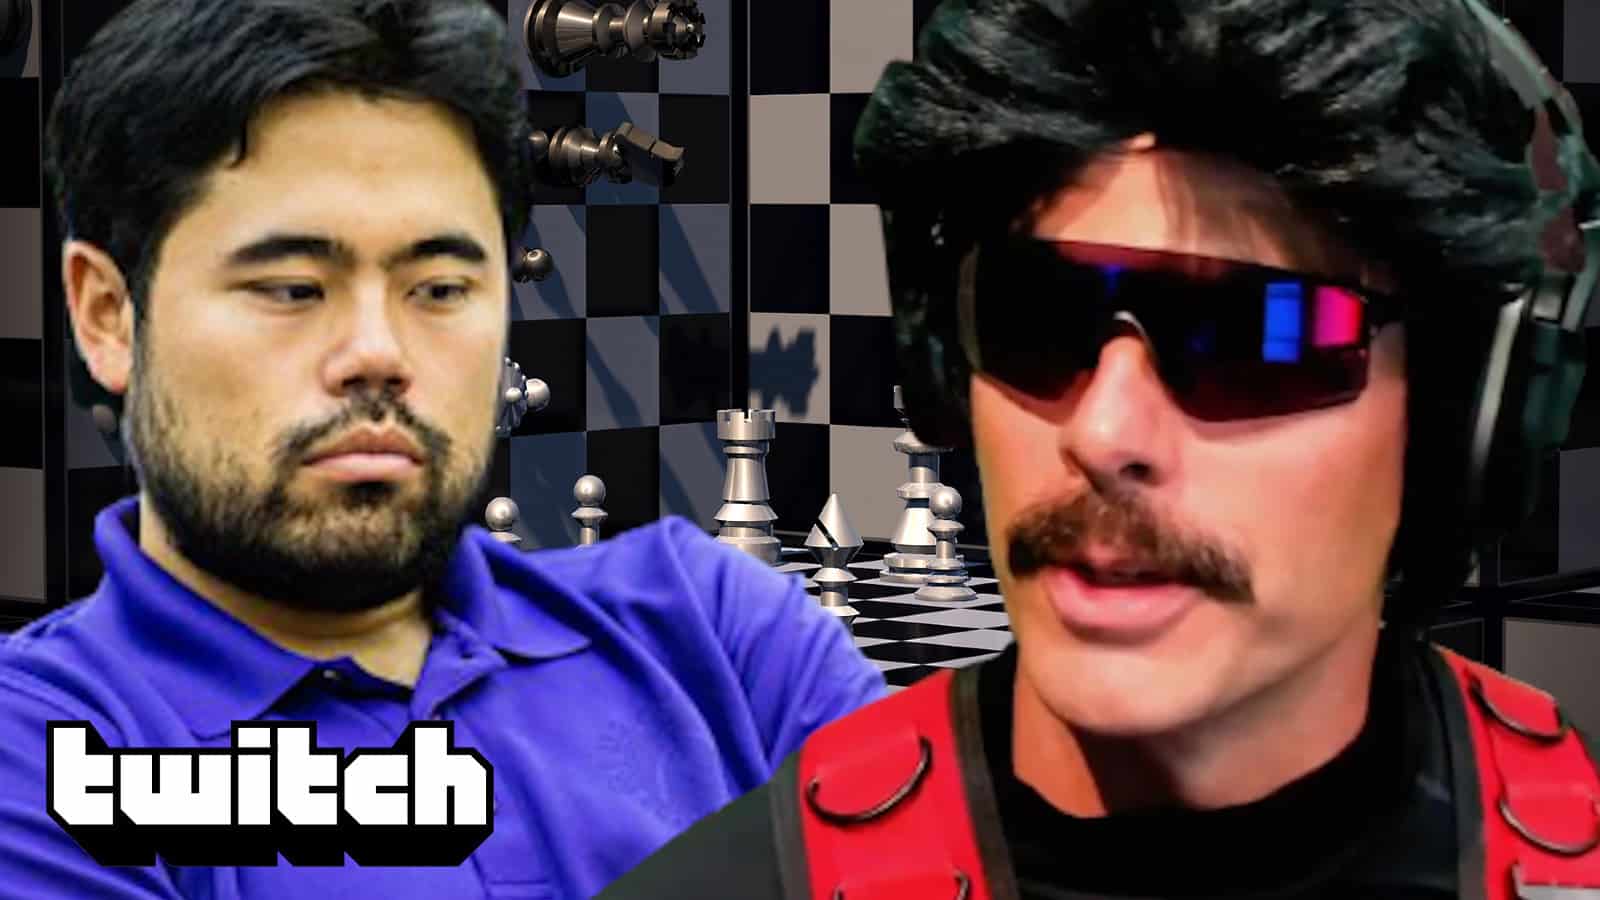 Dr Disrespect sends GMHikaru a gift after Twitch banned chess